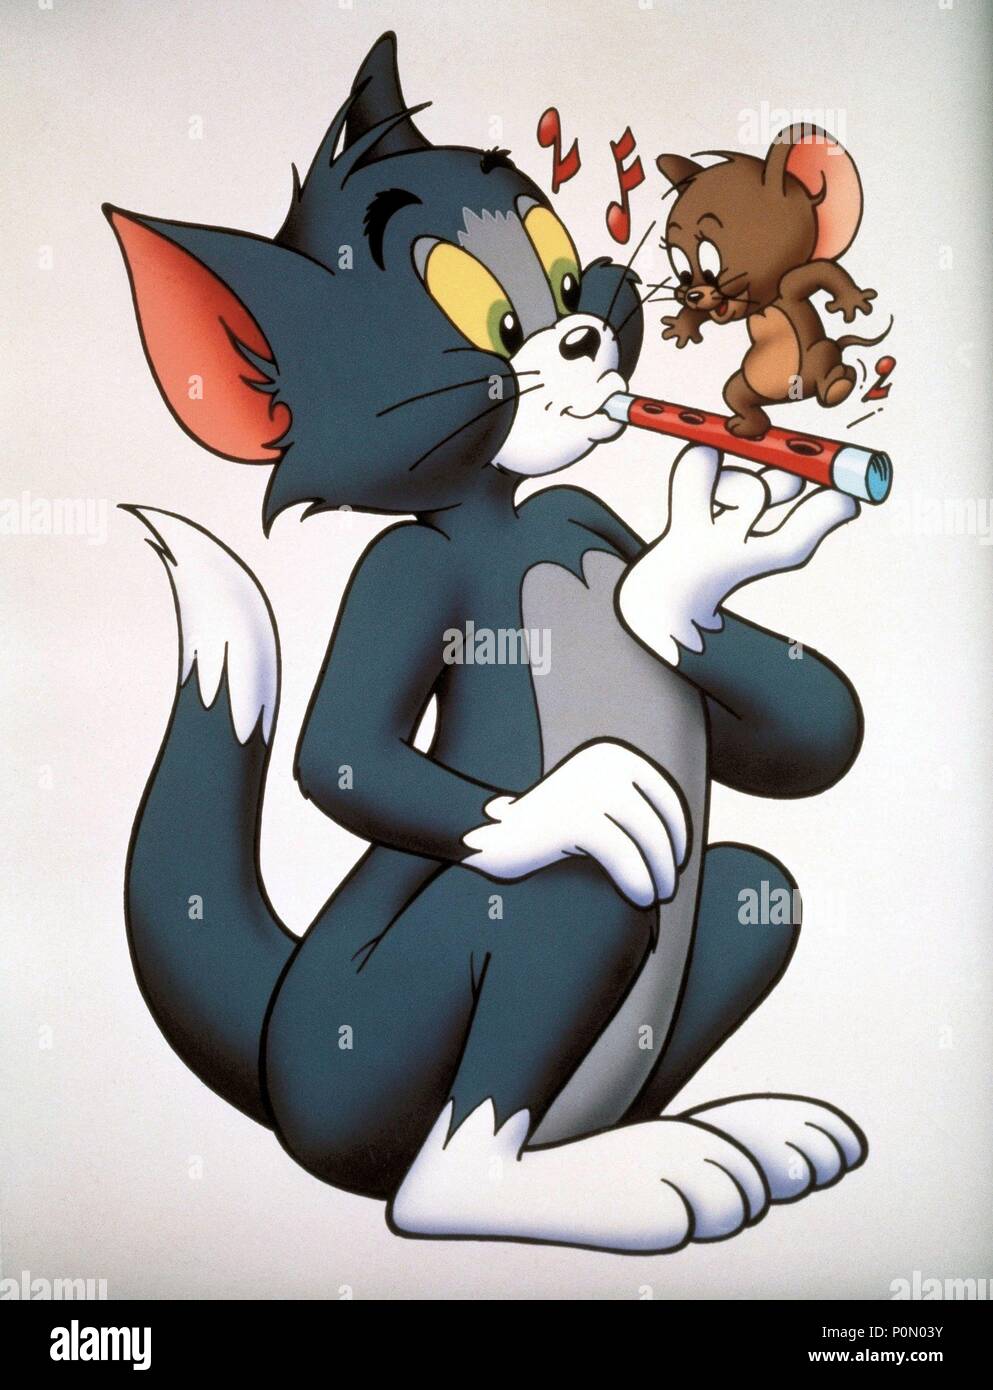 Original Film Title: TOM AND JERRY: THE MOVIE. English Title: TOM AND JERRY:  THE MOVIE. Film Director: PHIL ROMAN. Year: 1992. Credit: TURNER PICTURES /  Album Stock Photo - Alamy